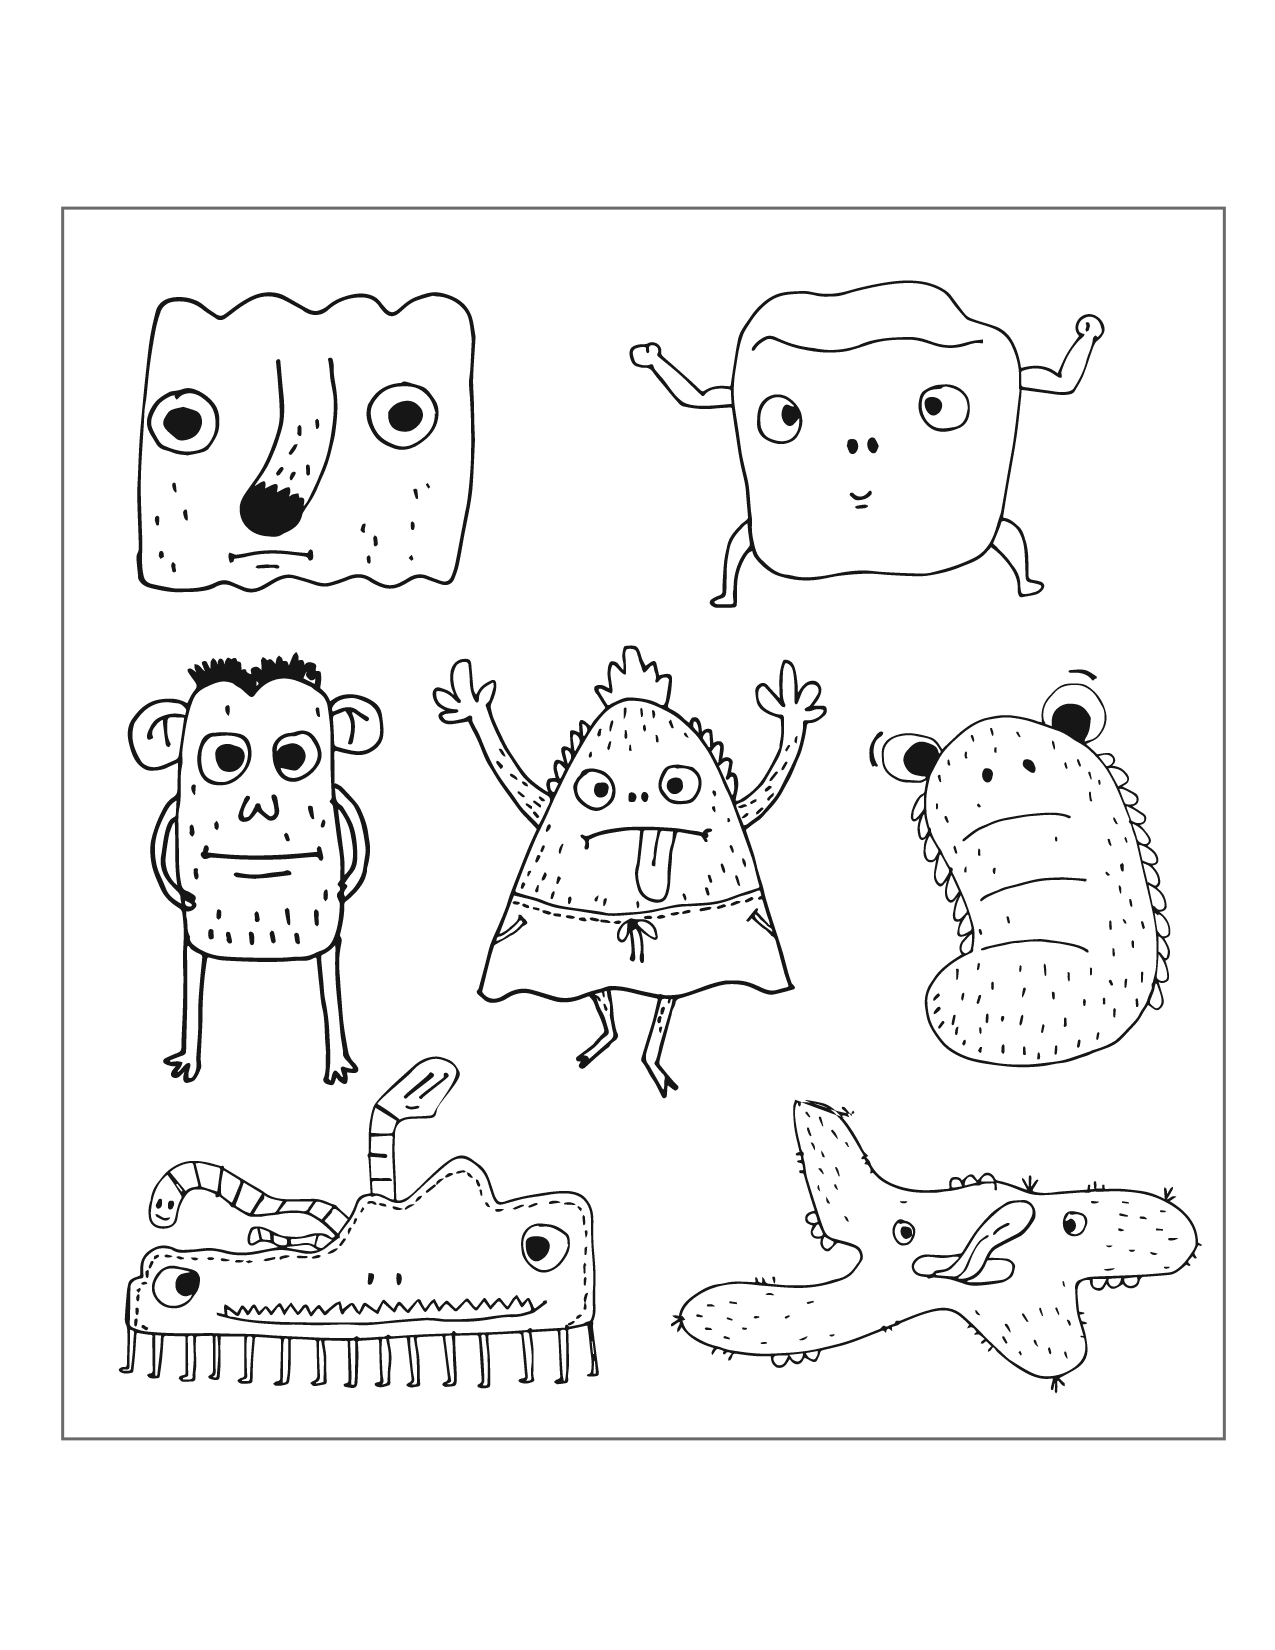 Cute Monster Characters Coloring Page 06